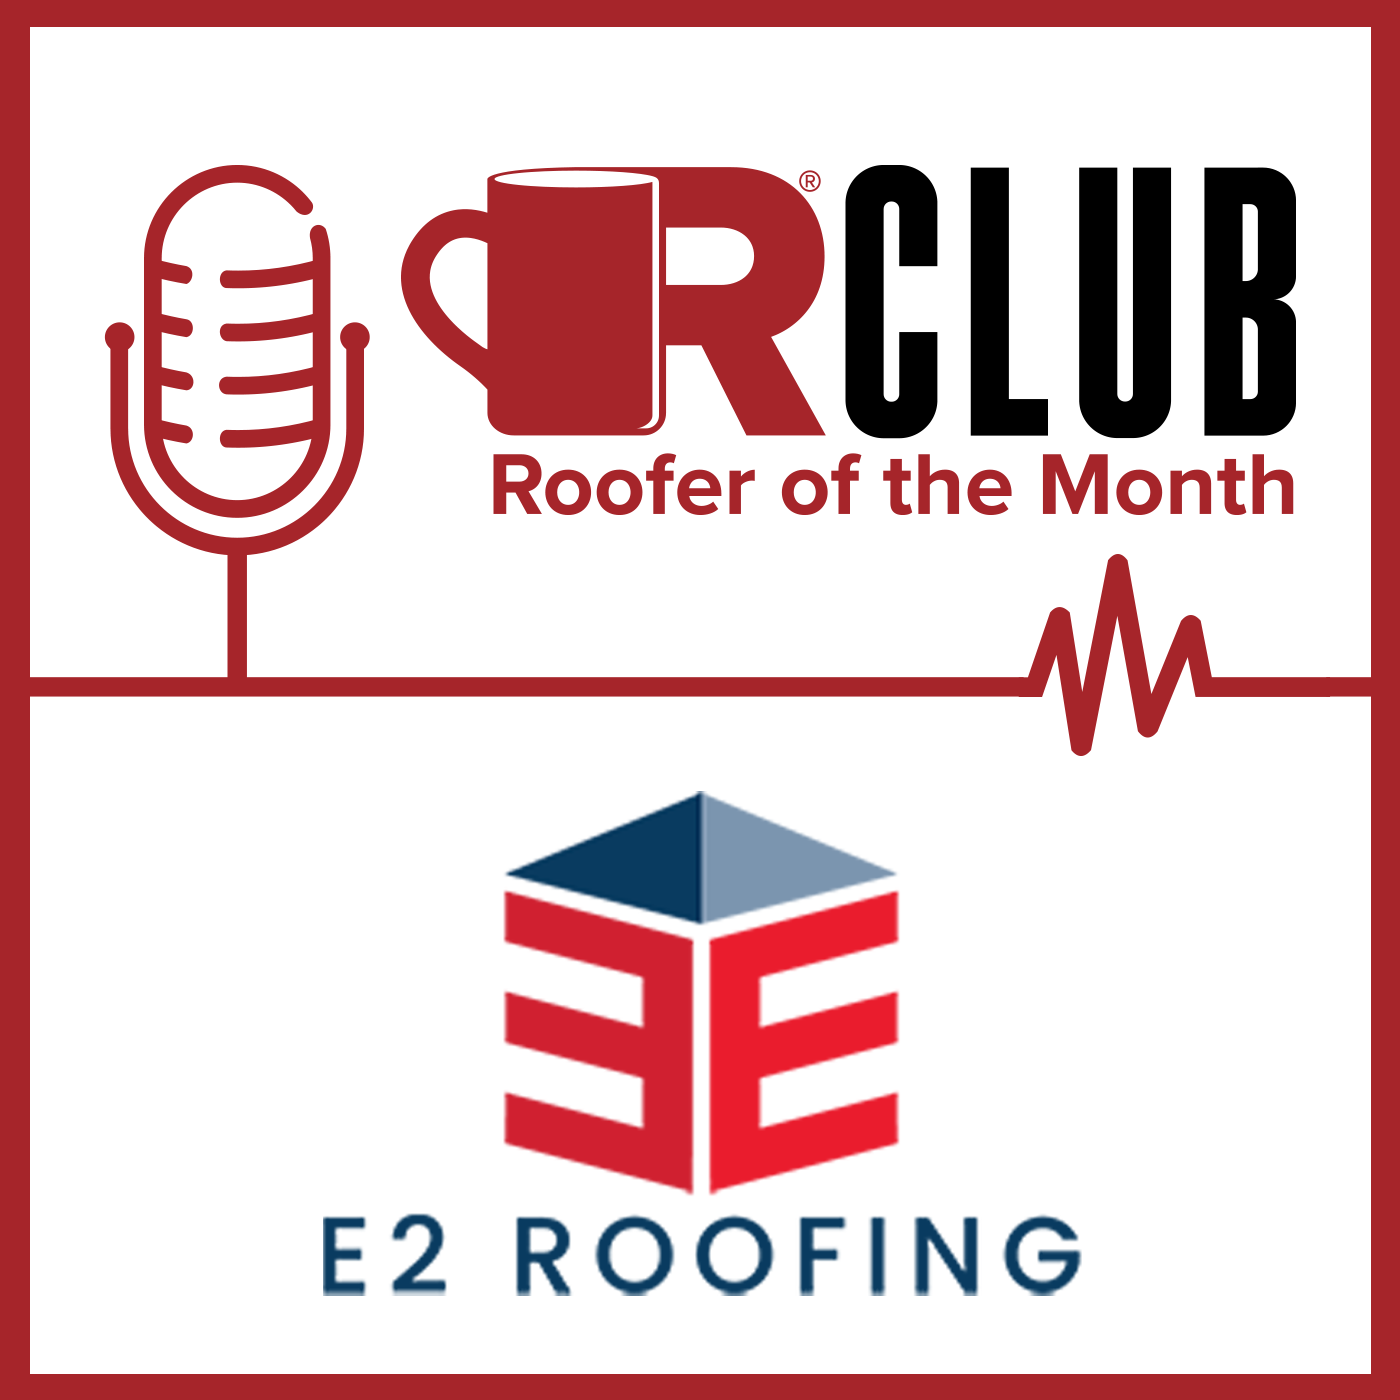 E2 Roofing - ROTM - August 22 - POD